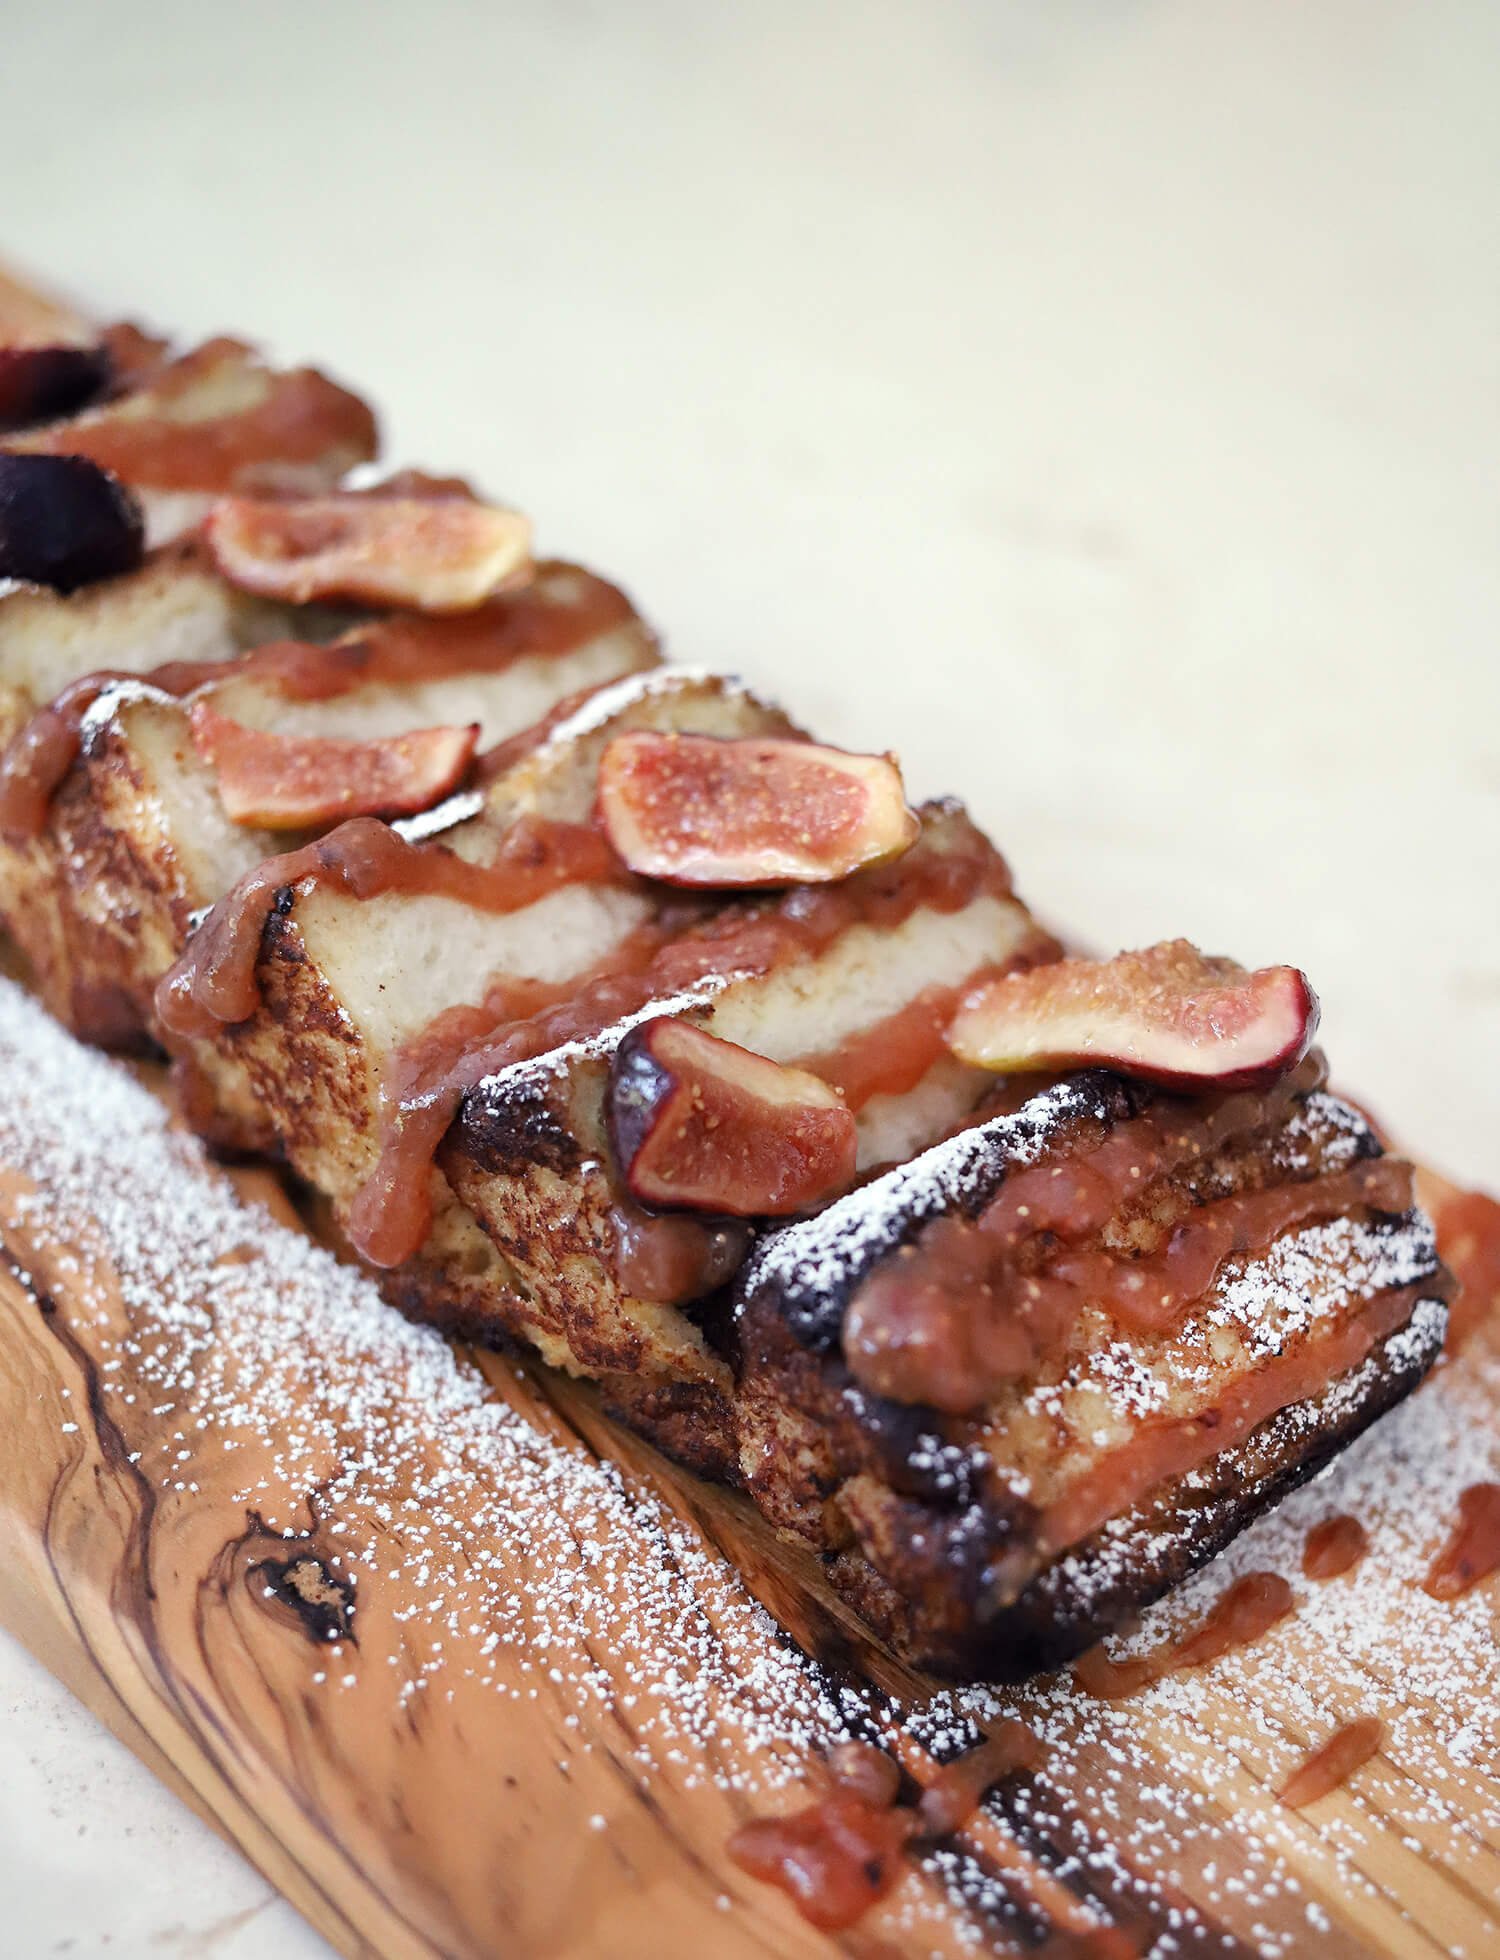 BOURBON BRICK FRENCH TOAST WITH FIG PURÉE